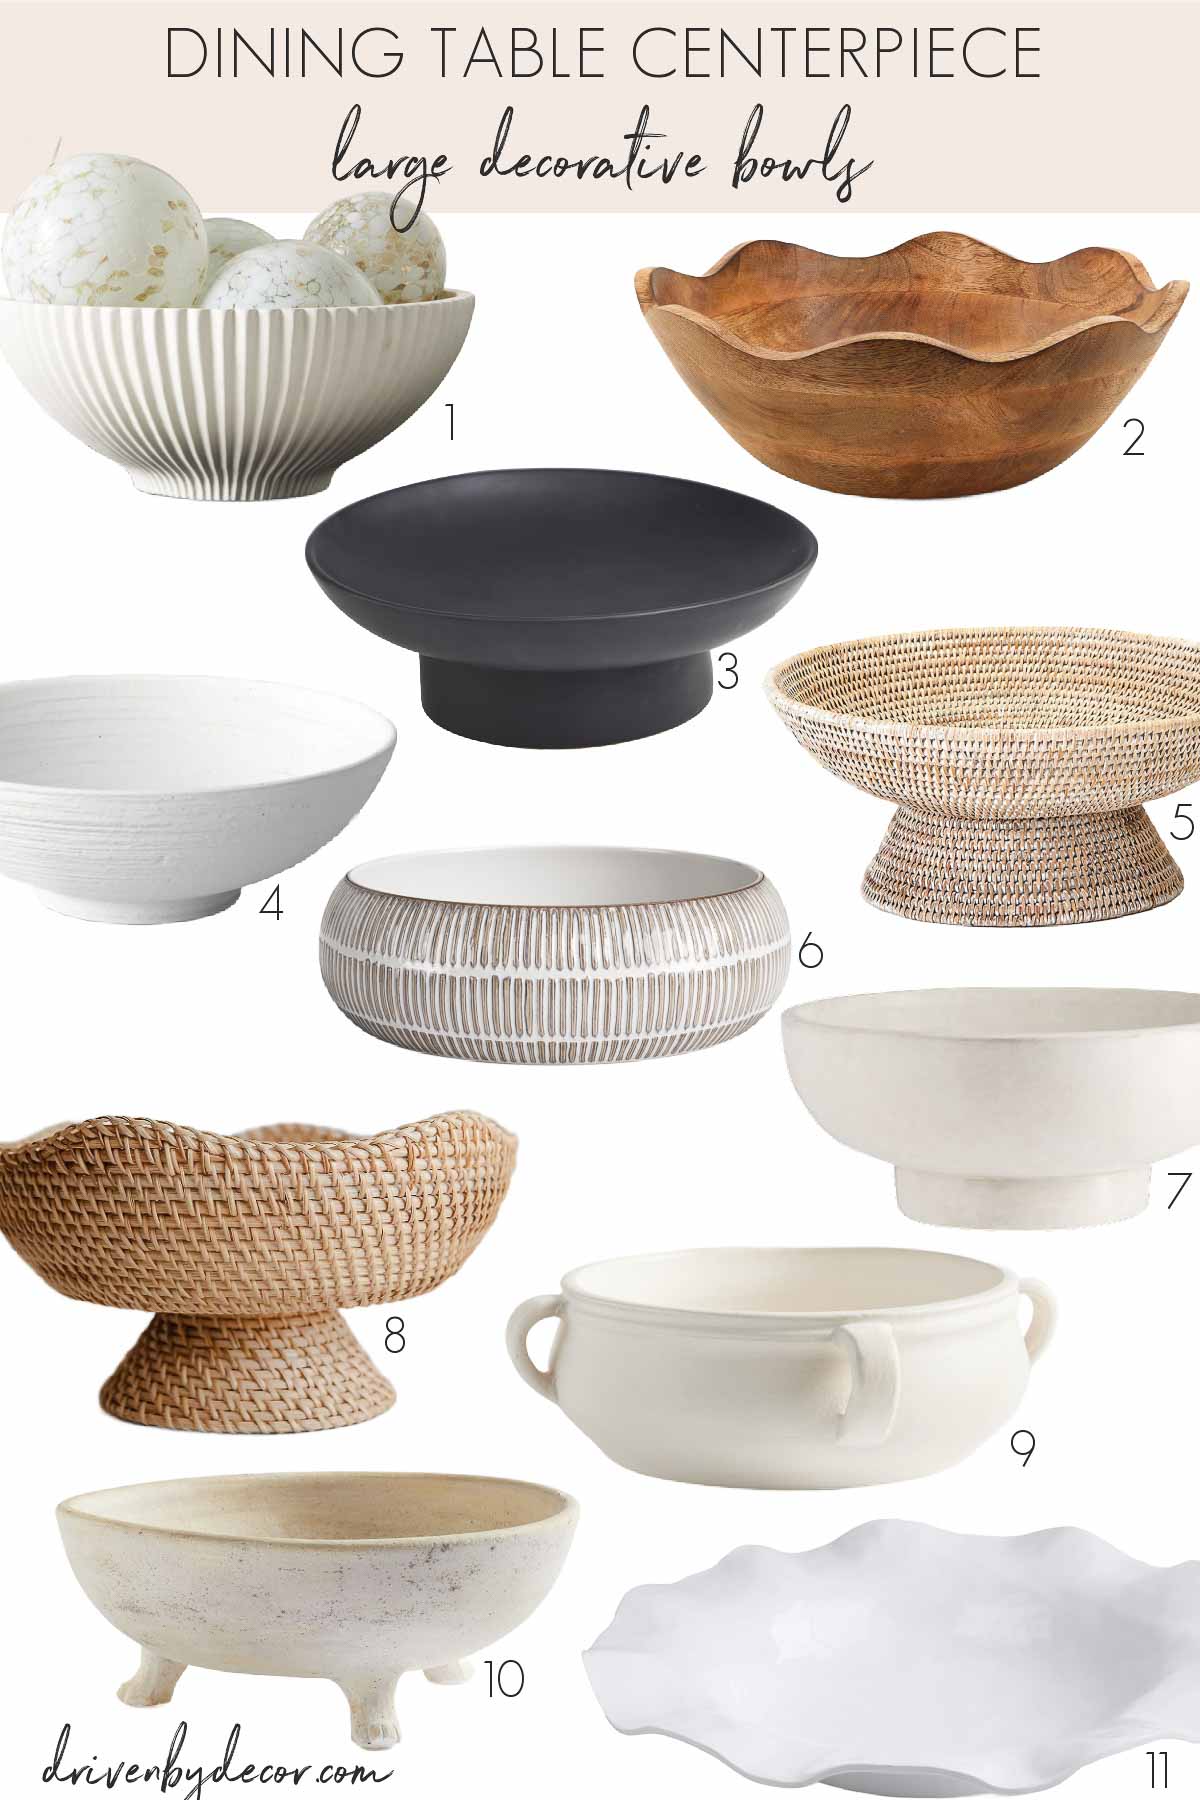 Decorative bowls to use as part of a dining table centerpiece